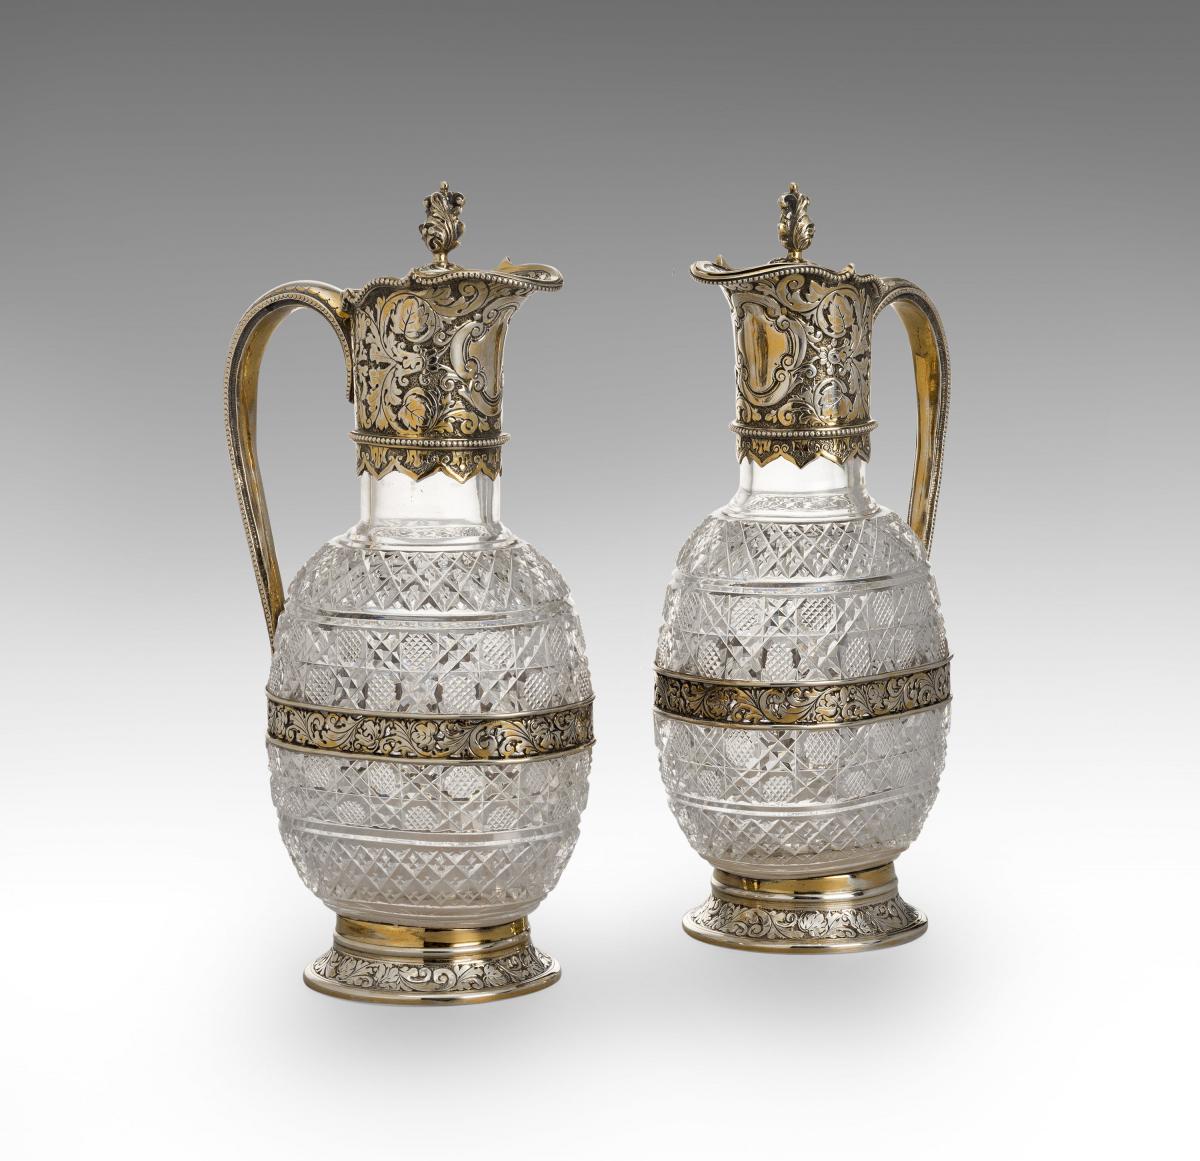 A Pair of Victorian Spirit Decanters